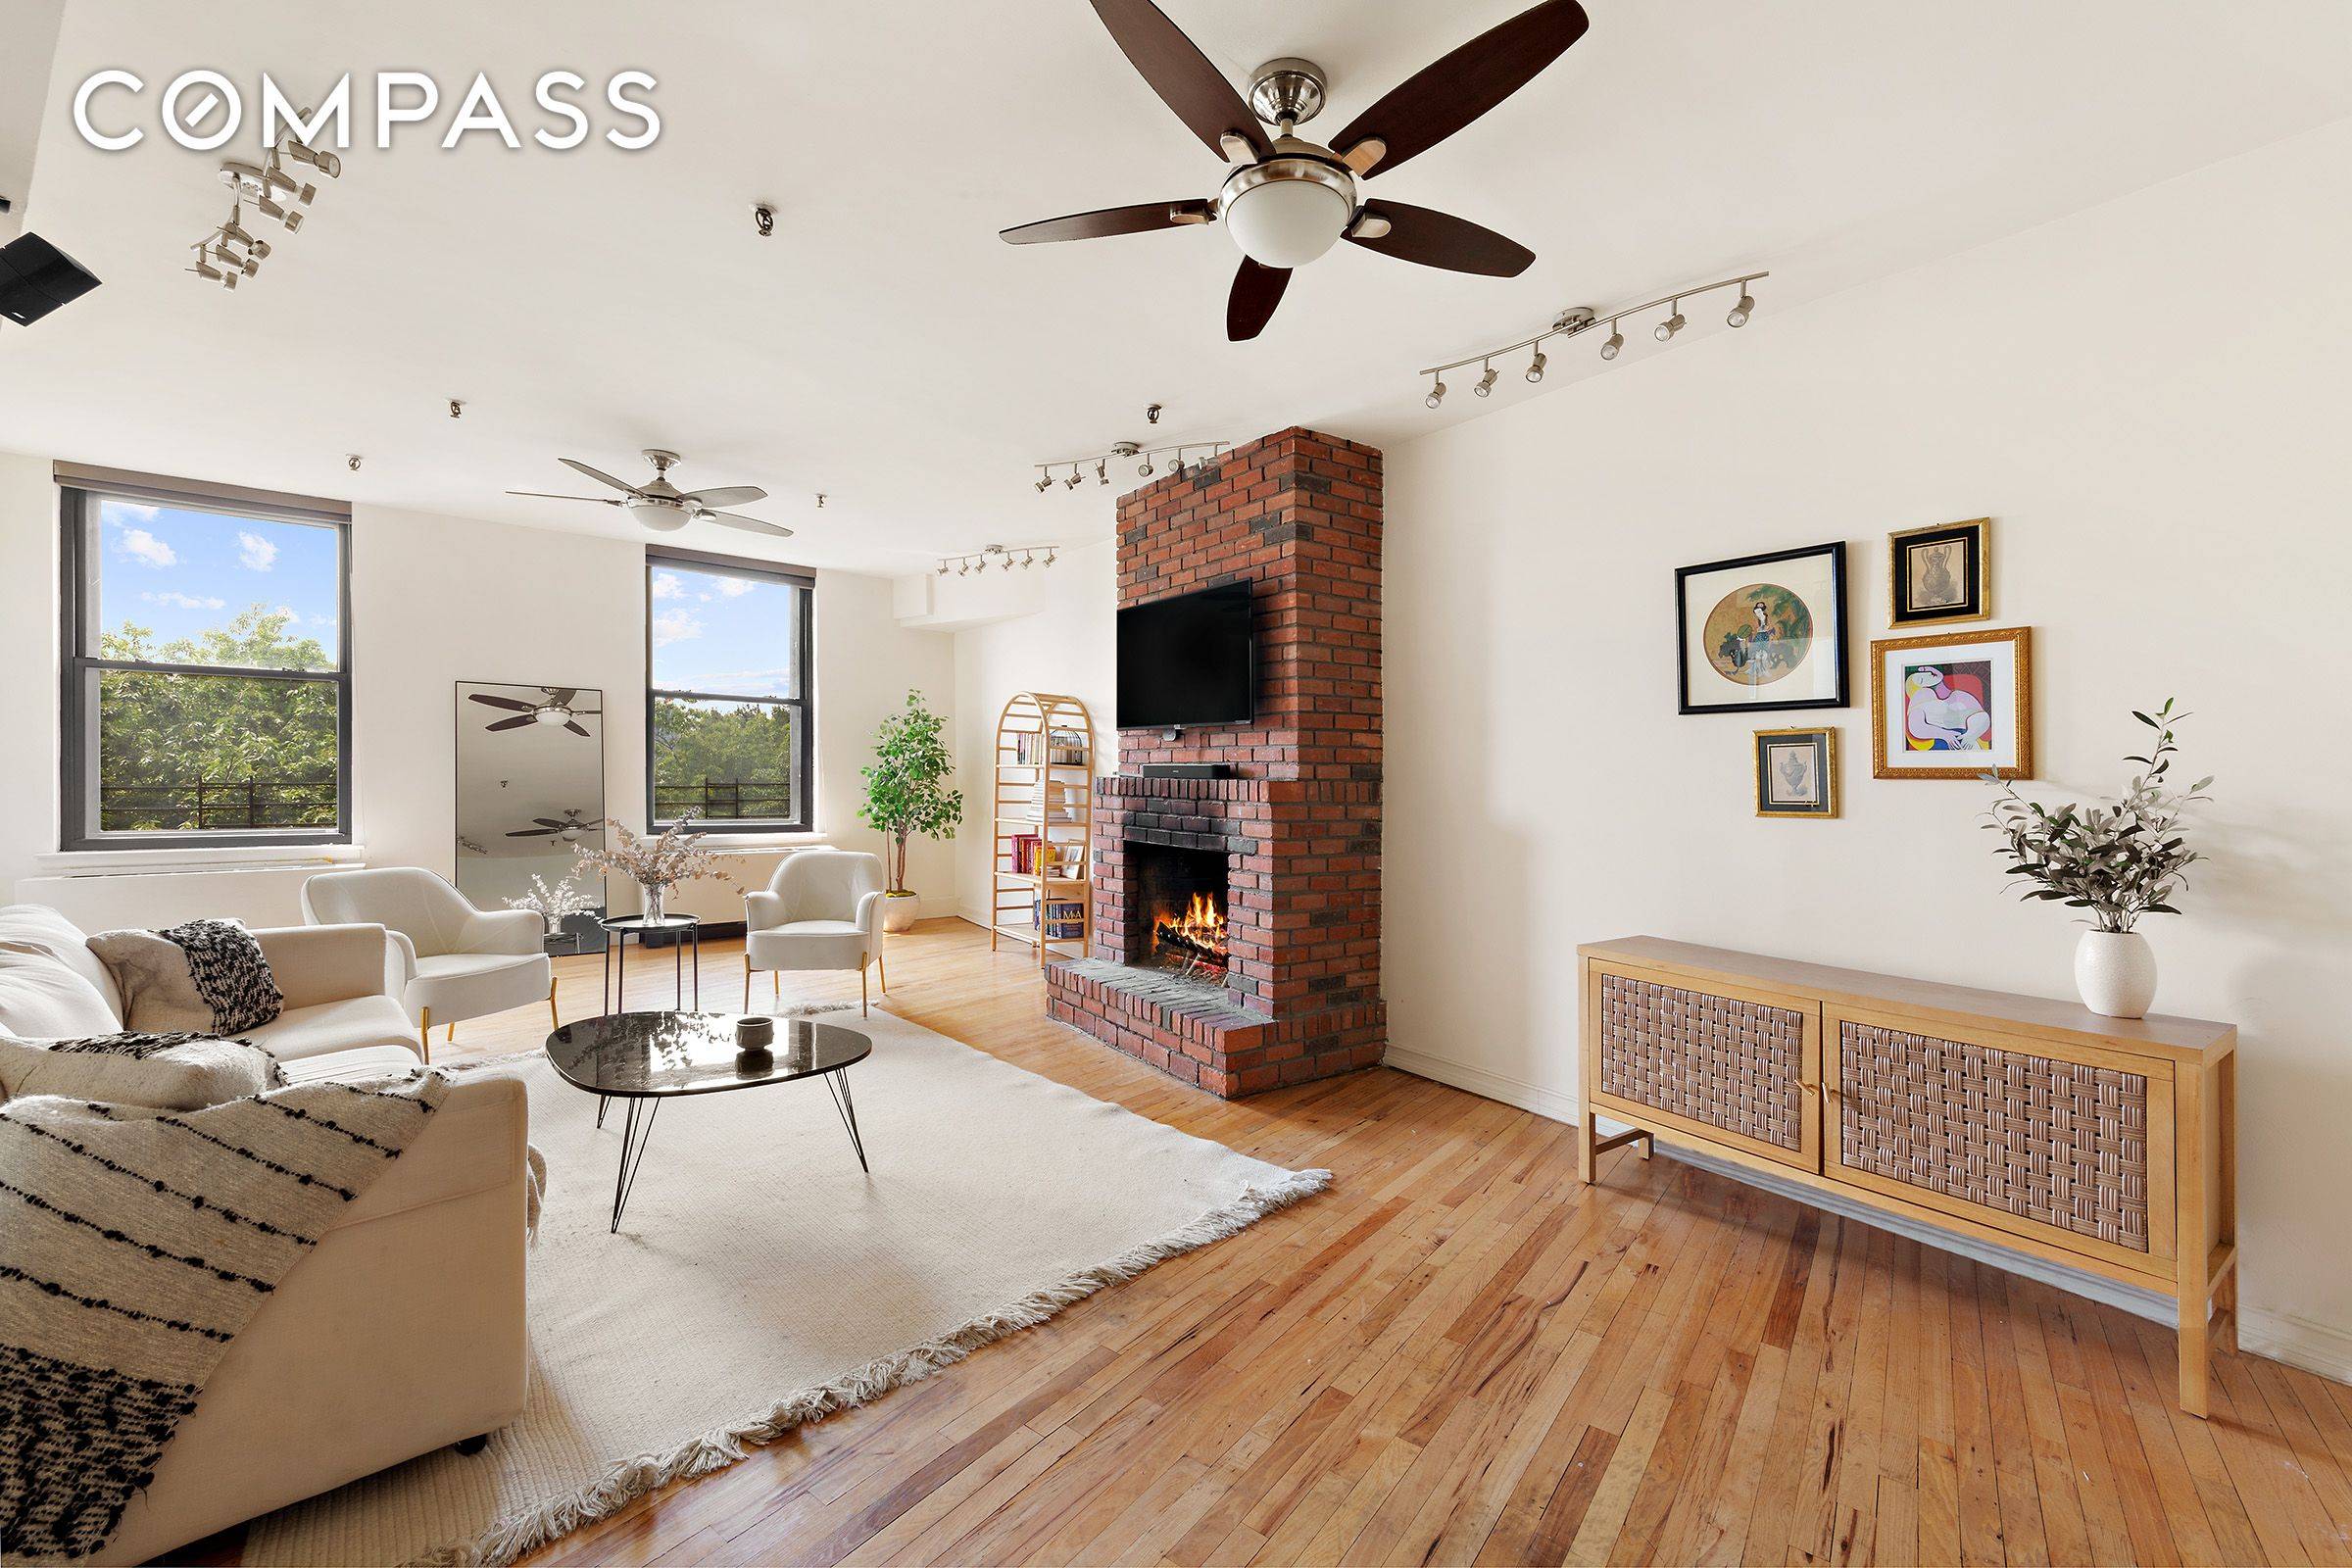 Enjoy sunsets and Hudson river views from every room in this expansive West Village loft with over 2200SF.